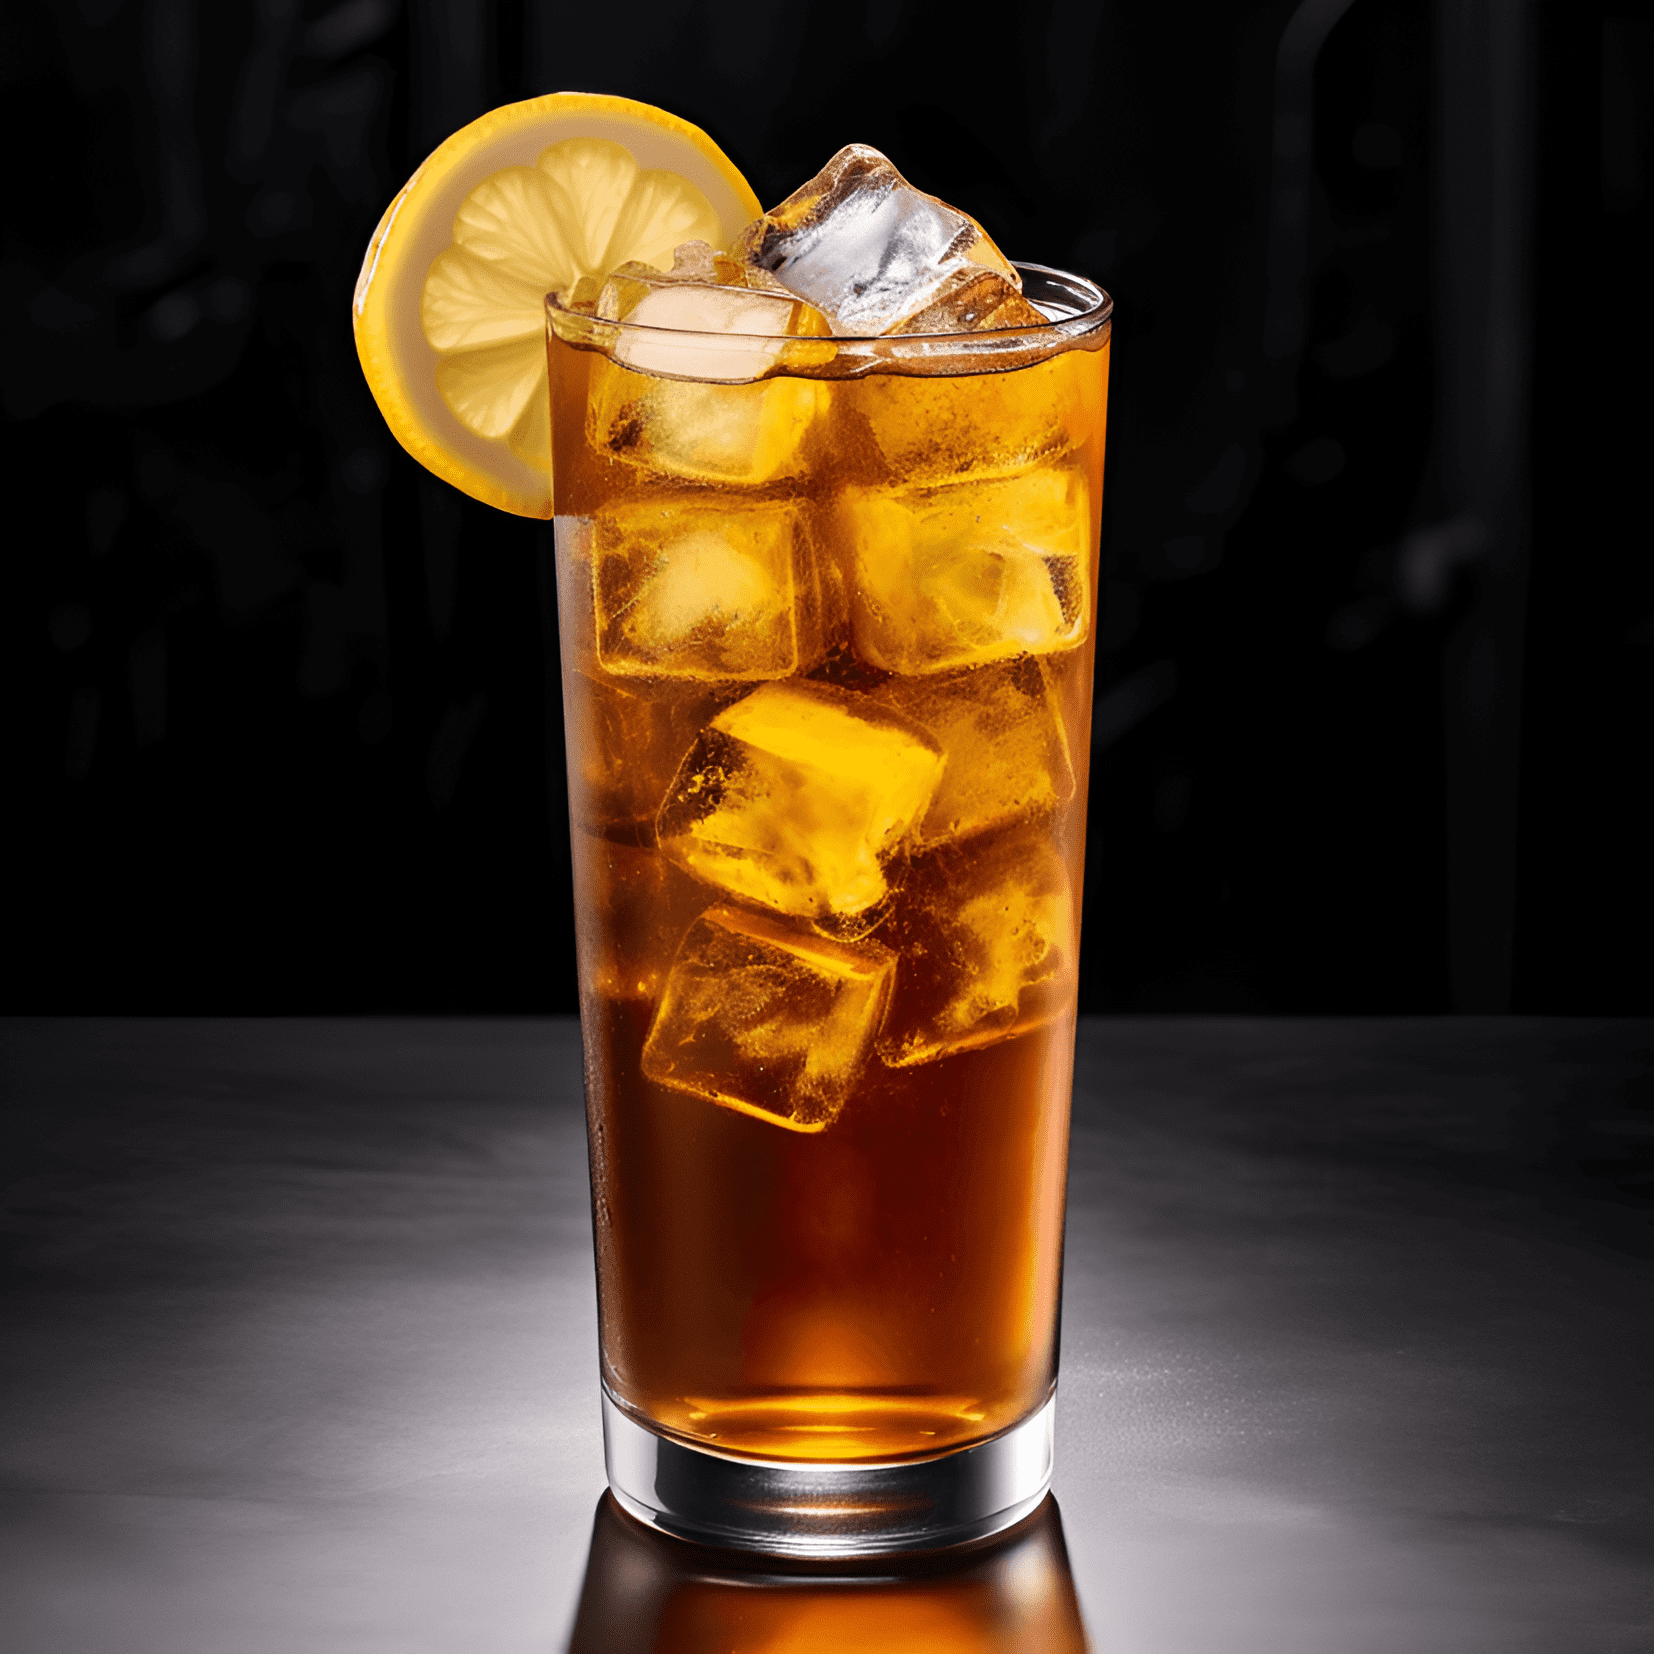 Texas Tea Cocktail Recipe - The Texas Tea has a bold and robust flavor, with a perfect balance of sweet, sour, and strong notes. The combination of multiple spirits creates a complex taste that is both invigorating and satisfying. The addition of cola and sweet and sour mix adds a refreshing sweetness that complements the strong alcohol flavors.